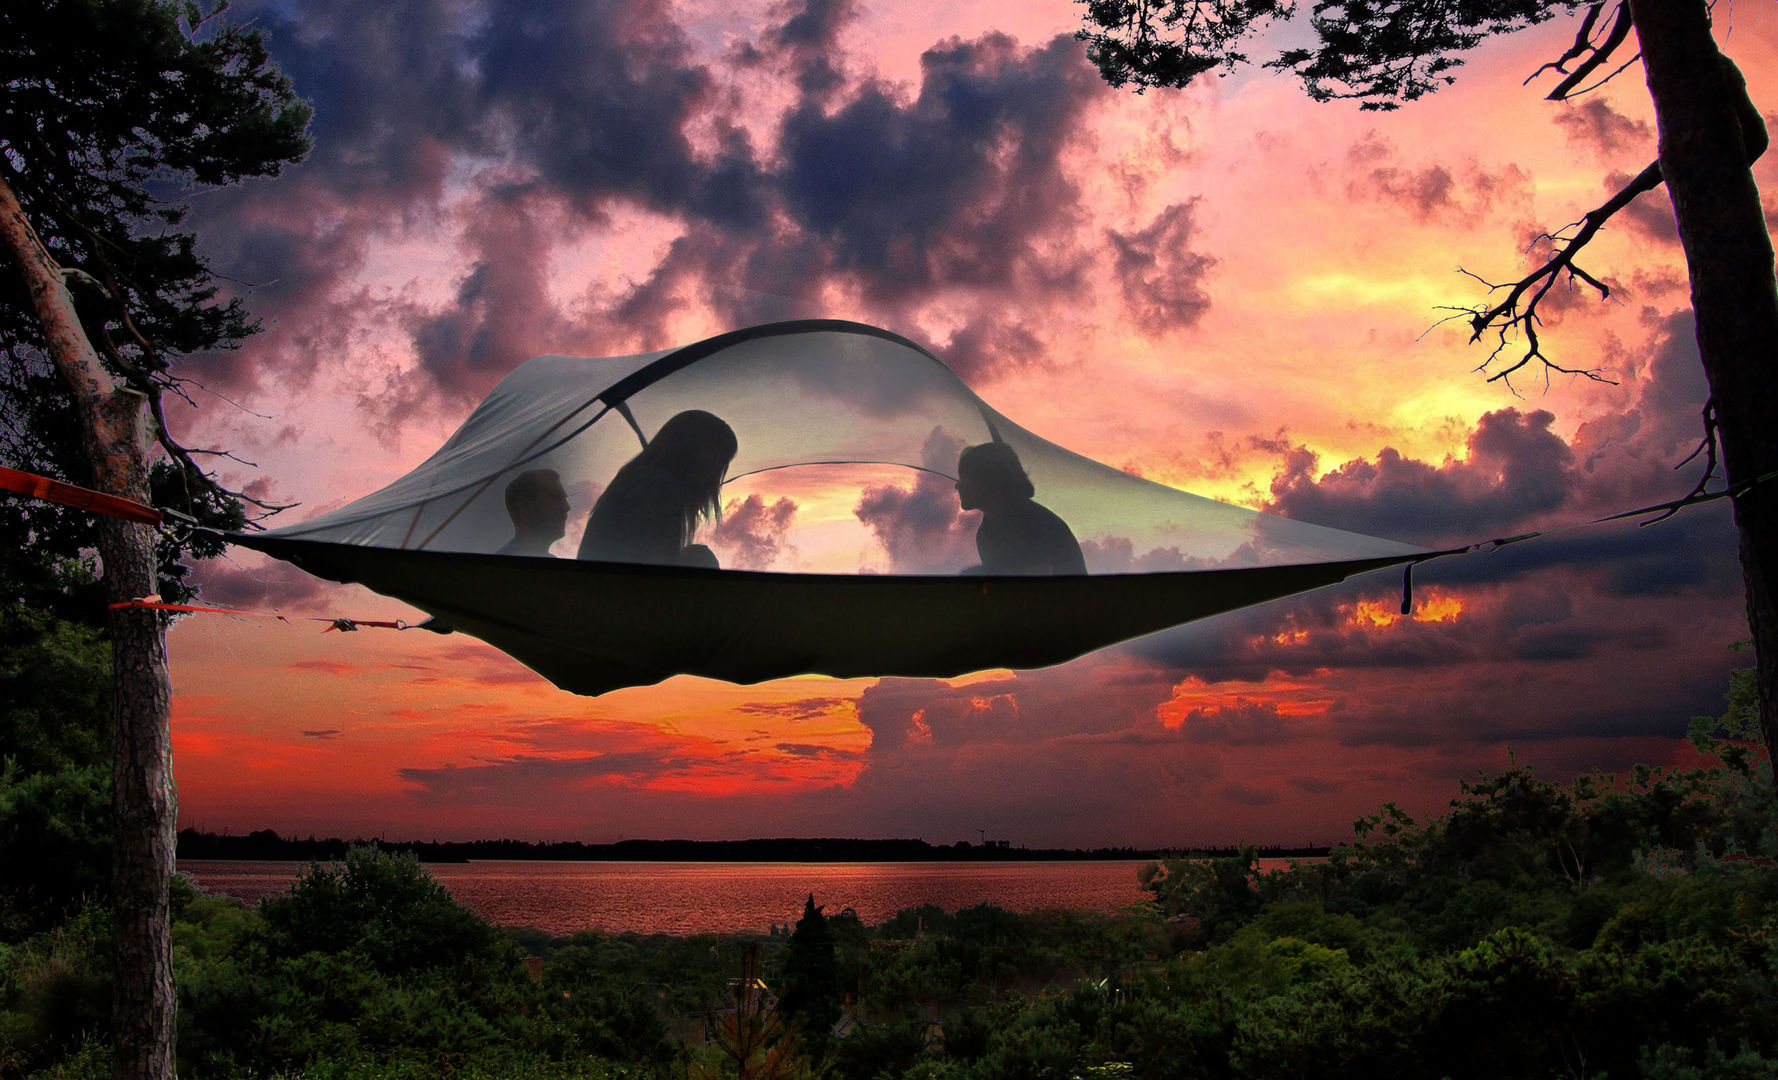 Add a New Touch to Your Camping Adventure with the Tentsile Stingray, Tentsile Tentsile Vườn phong cách hiện đại Swings & play sets